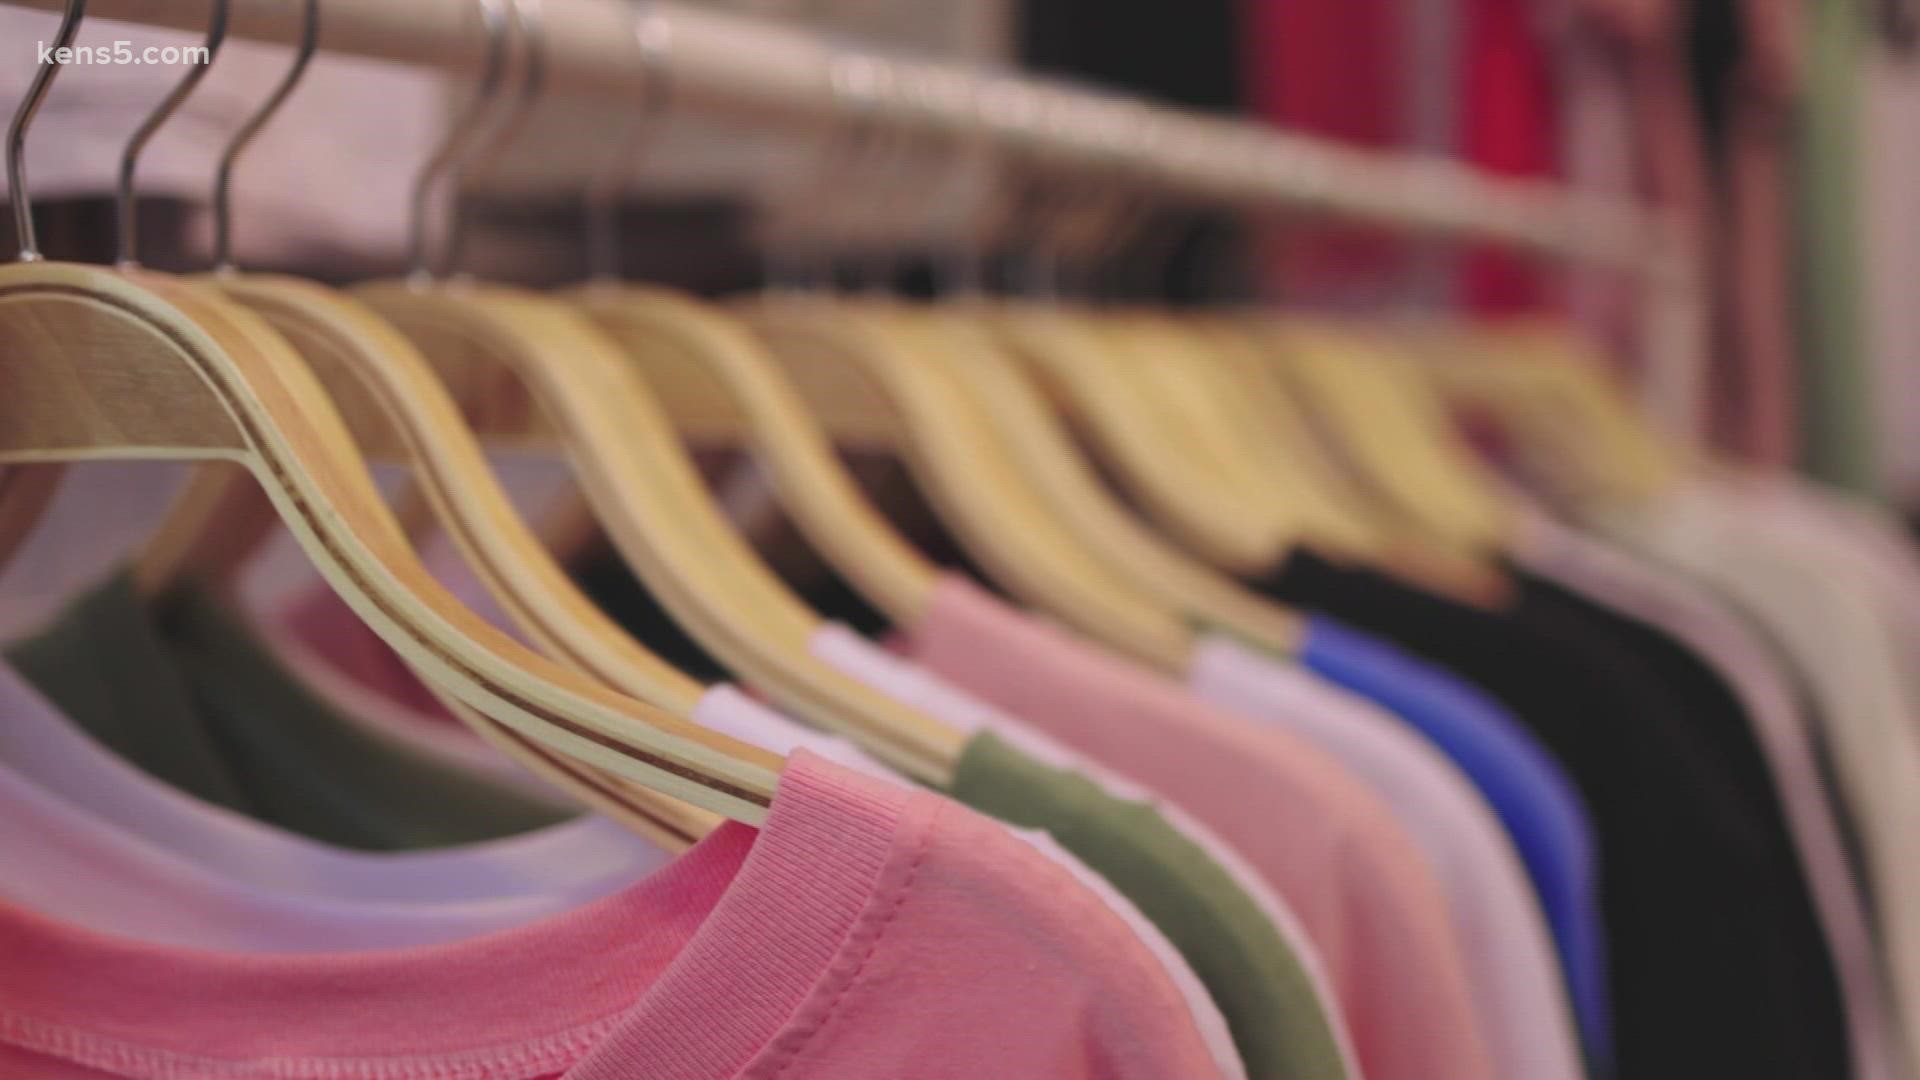 Before you spend any money, experts say it helps to evaluate what's in your child's closet. You can also offer to swap clothes with other families.